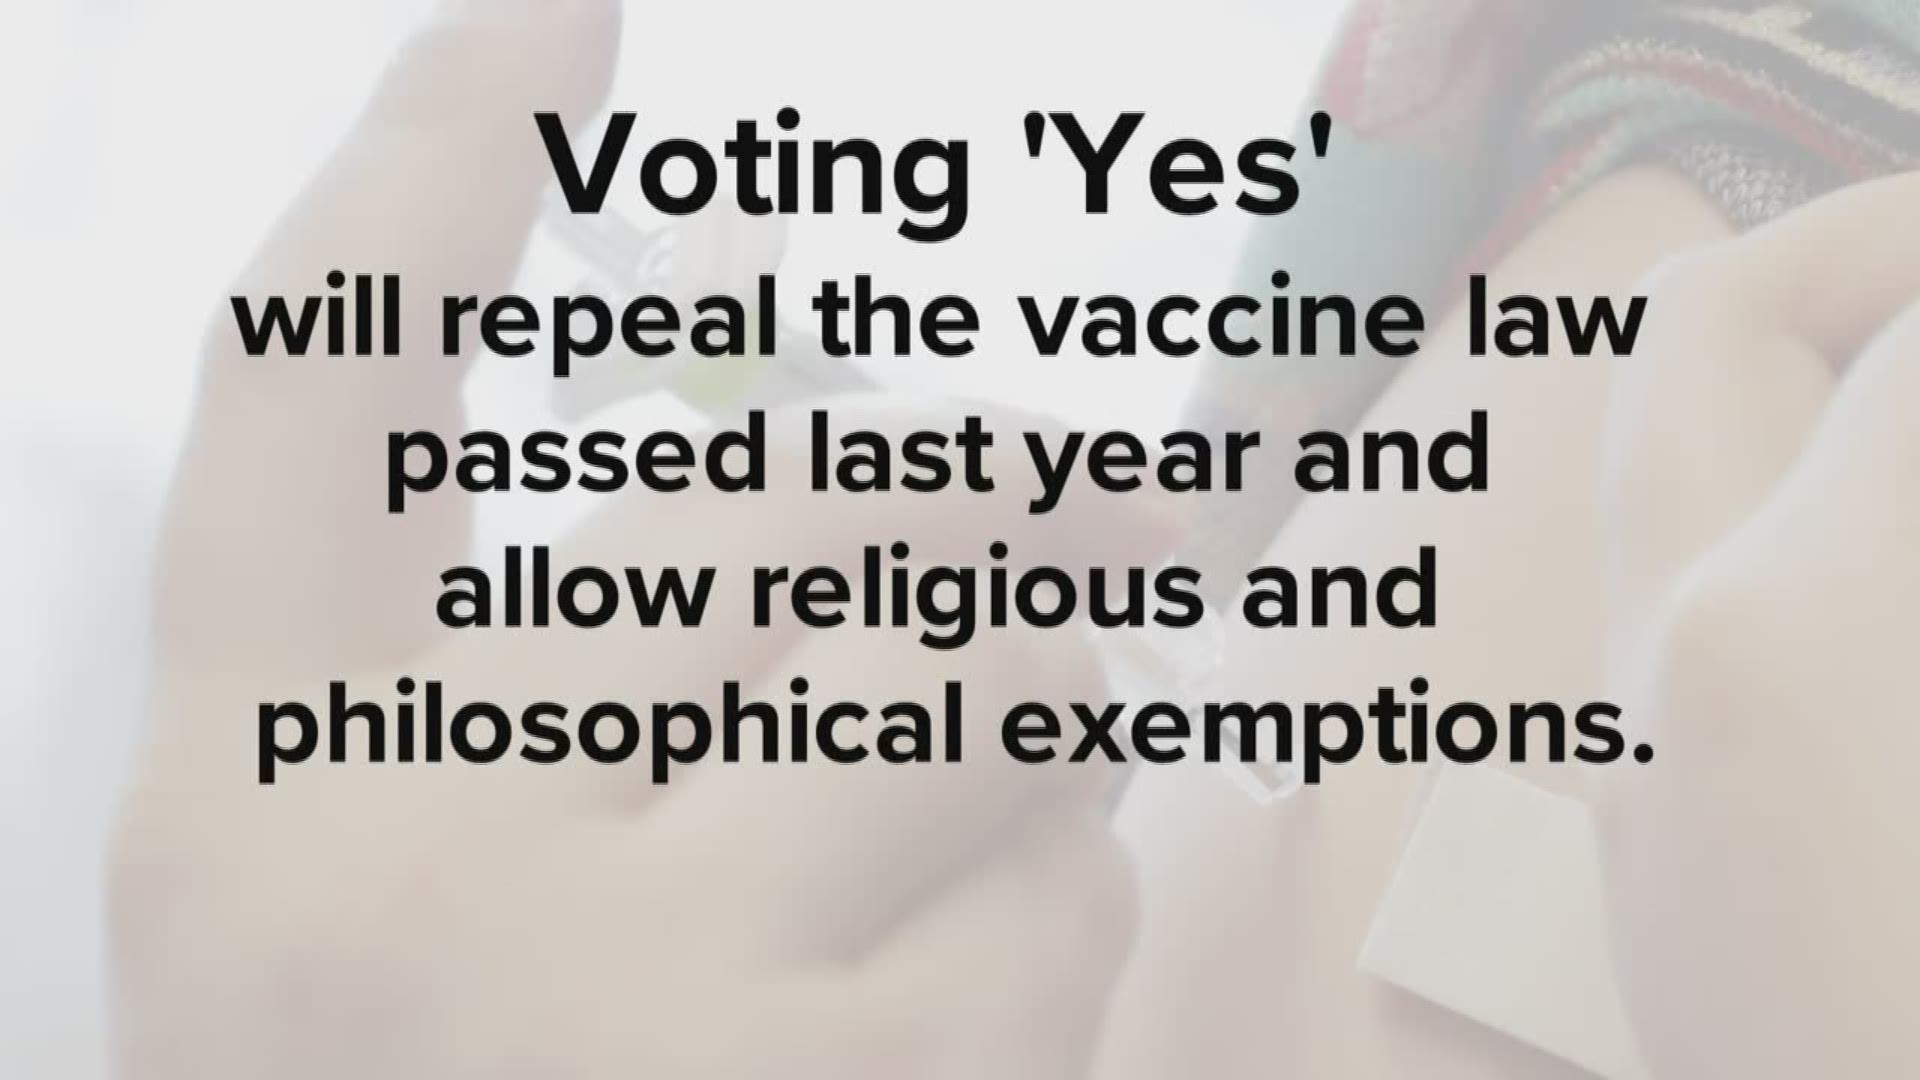 Question 1 is a vaccine referendum to overturn a law passed last year.